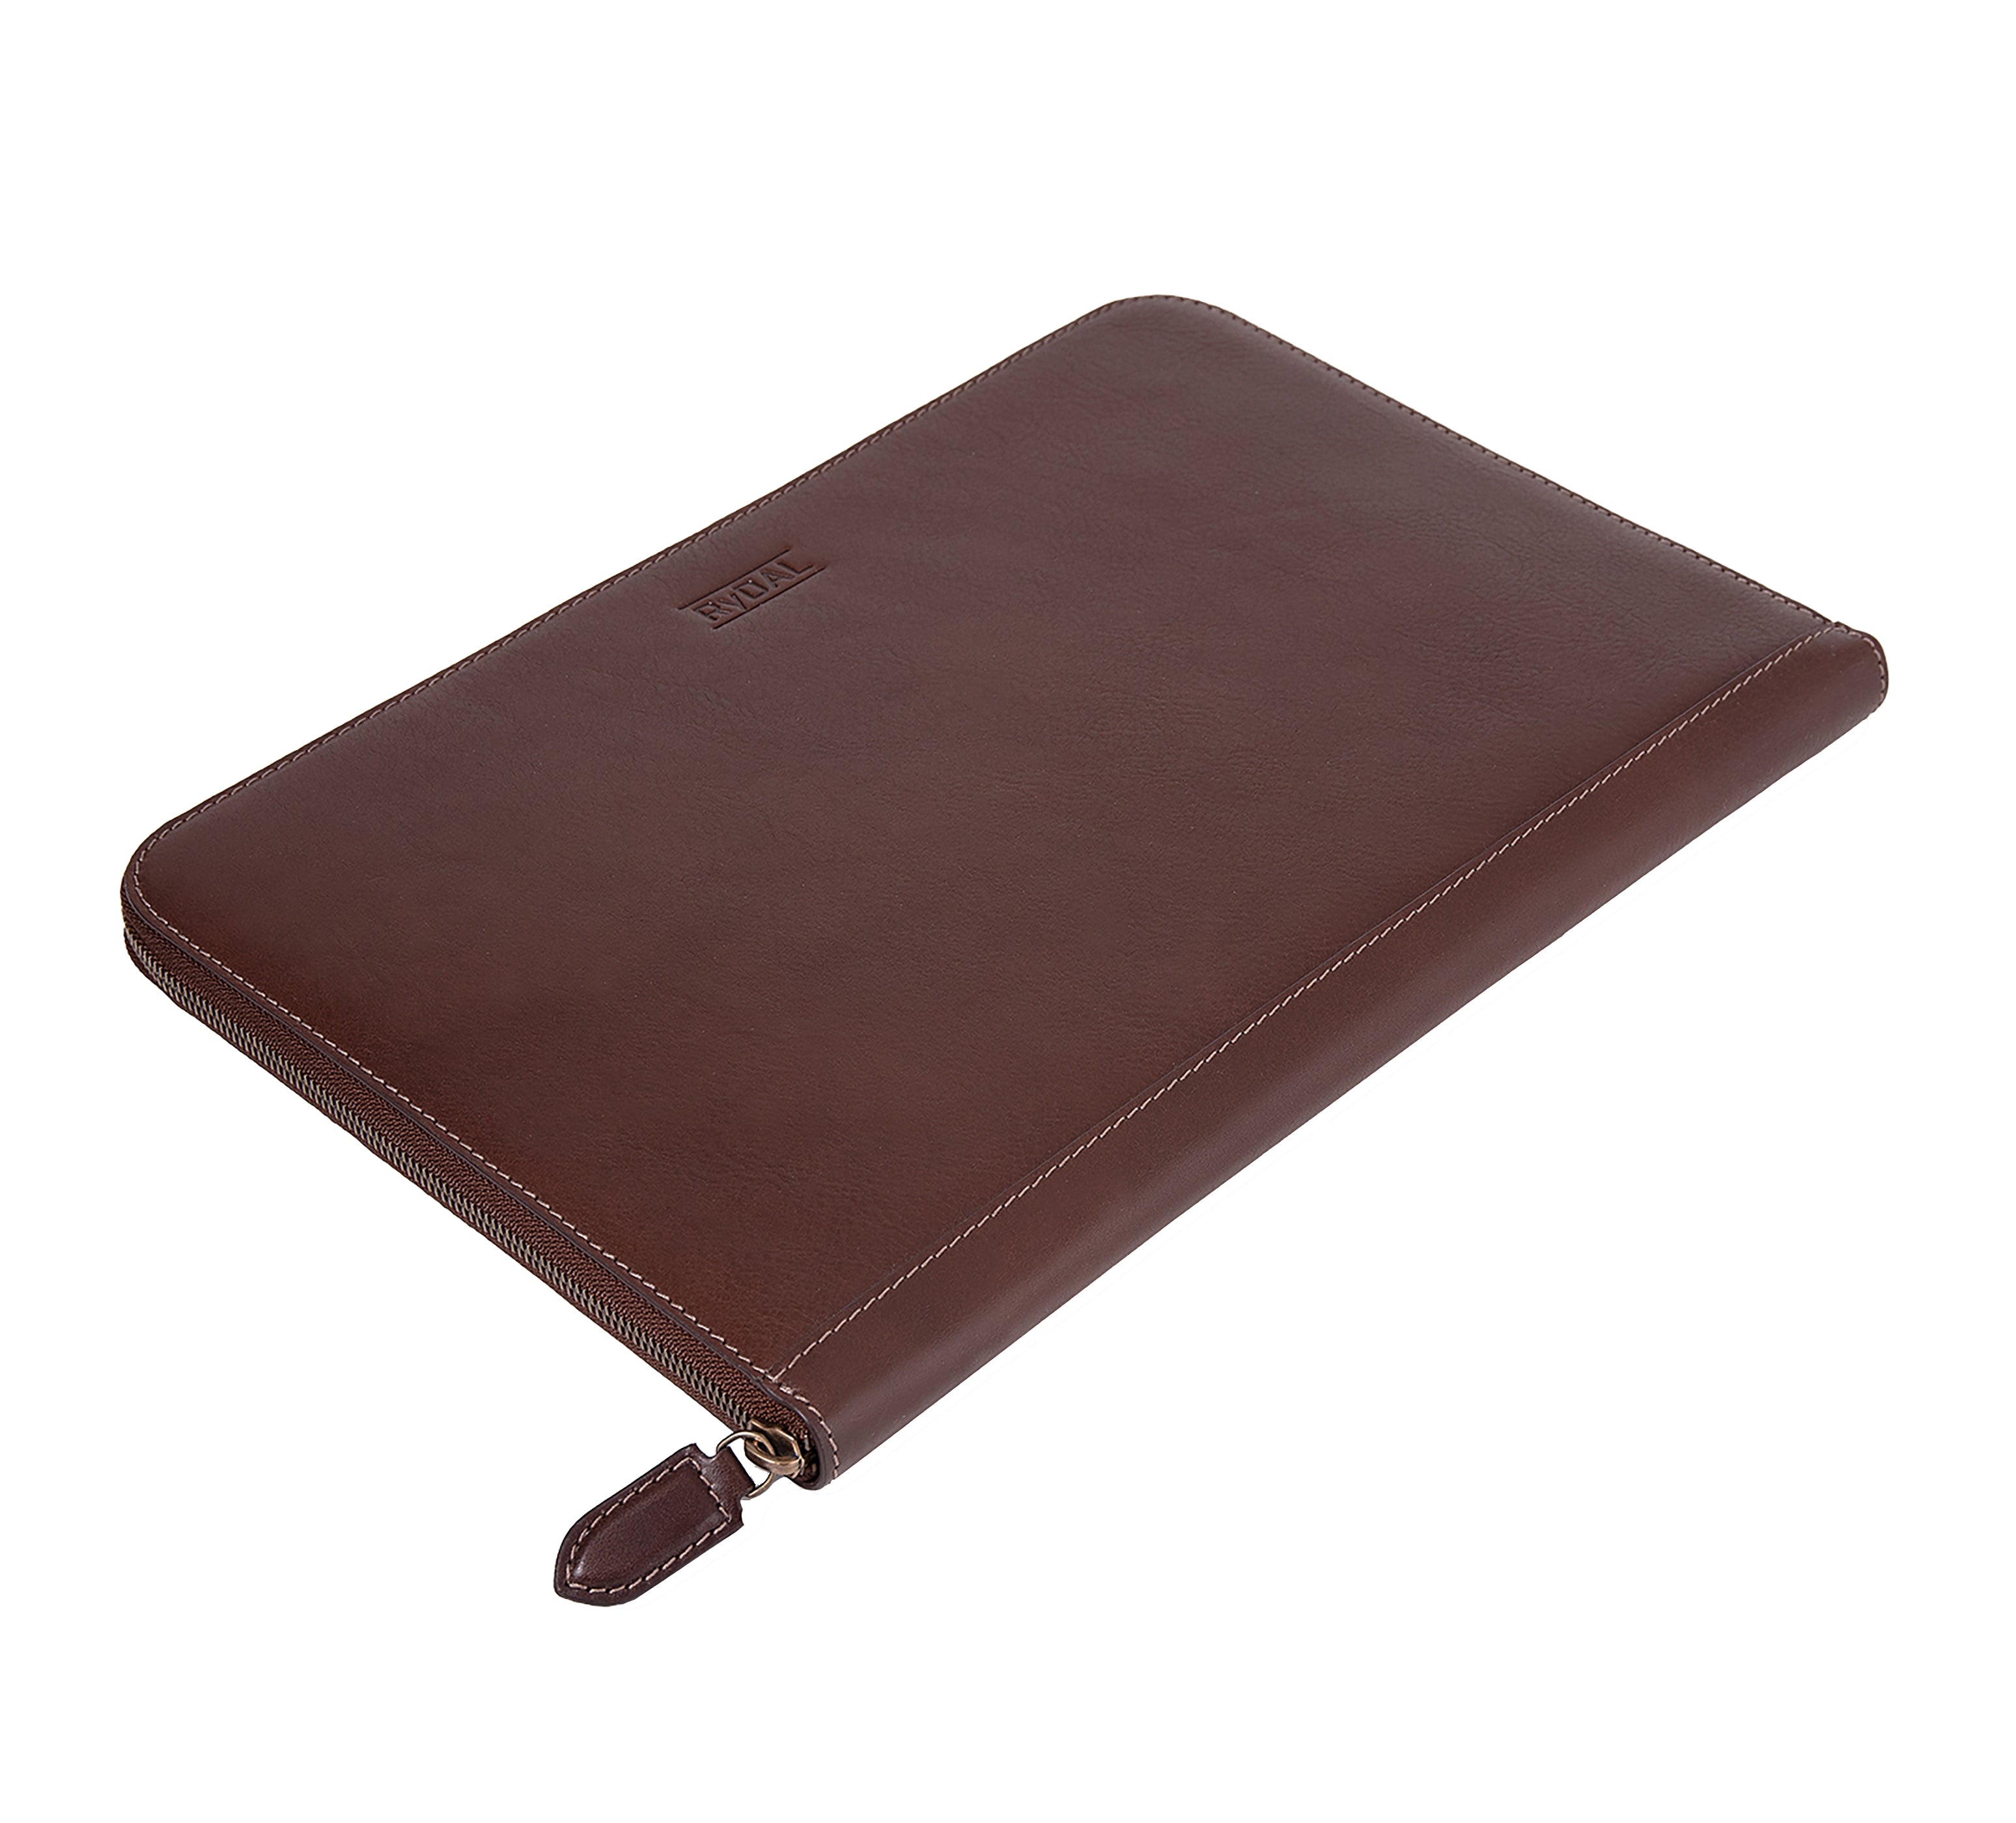 Albany Leather Document Holder from Rydal in 'Dark Brown' lying flat. 